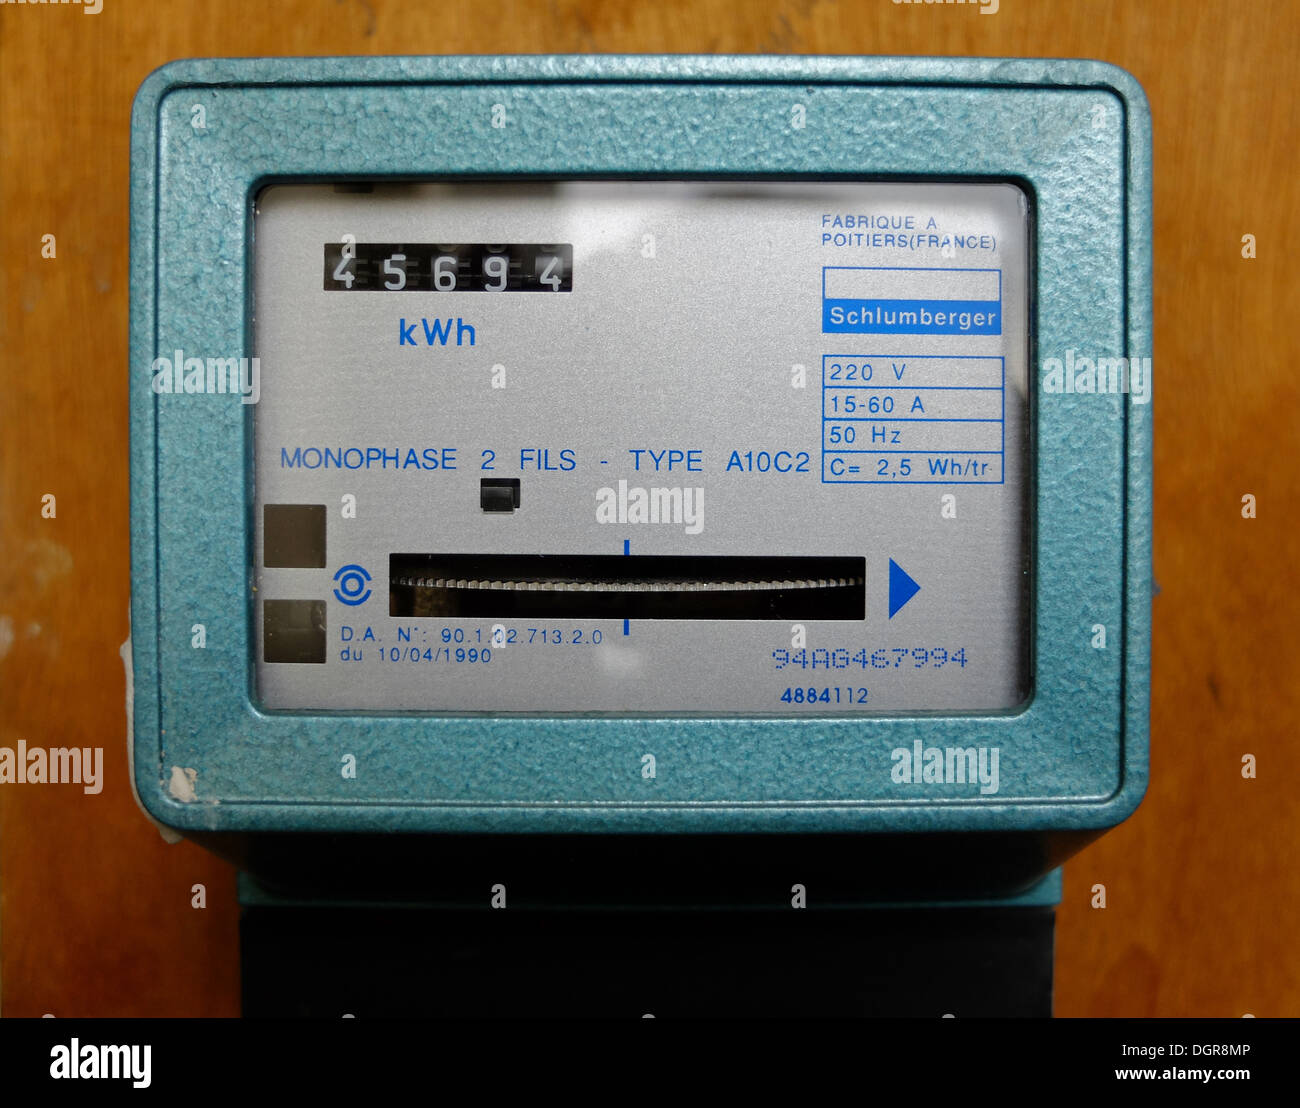 Old electric meter,Paris,France Stock Photo - Alamy